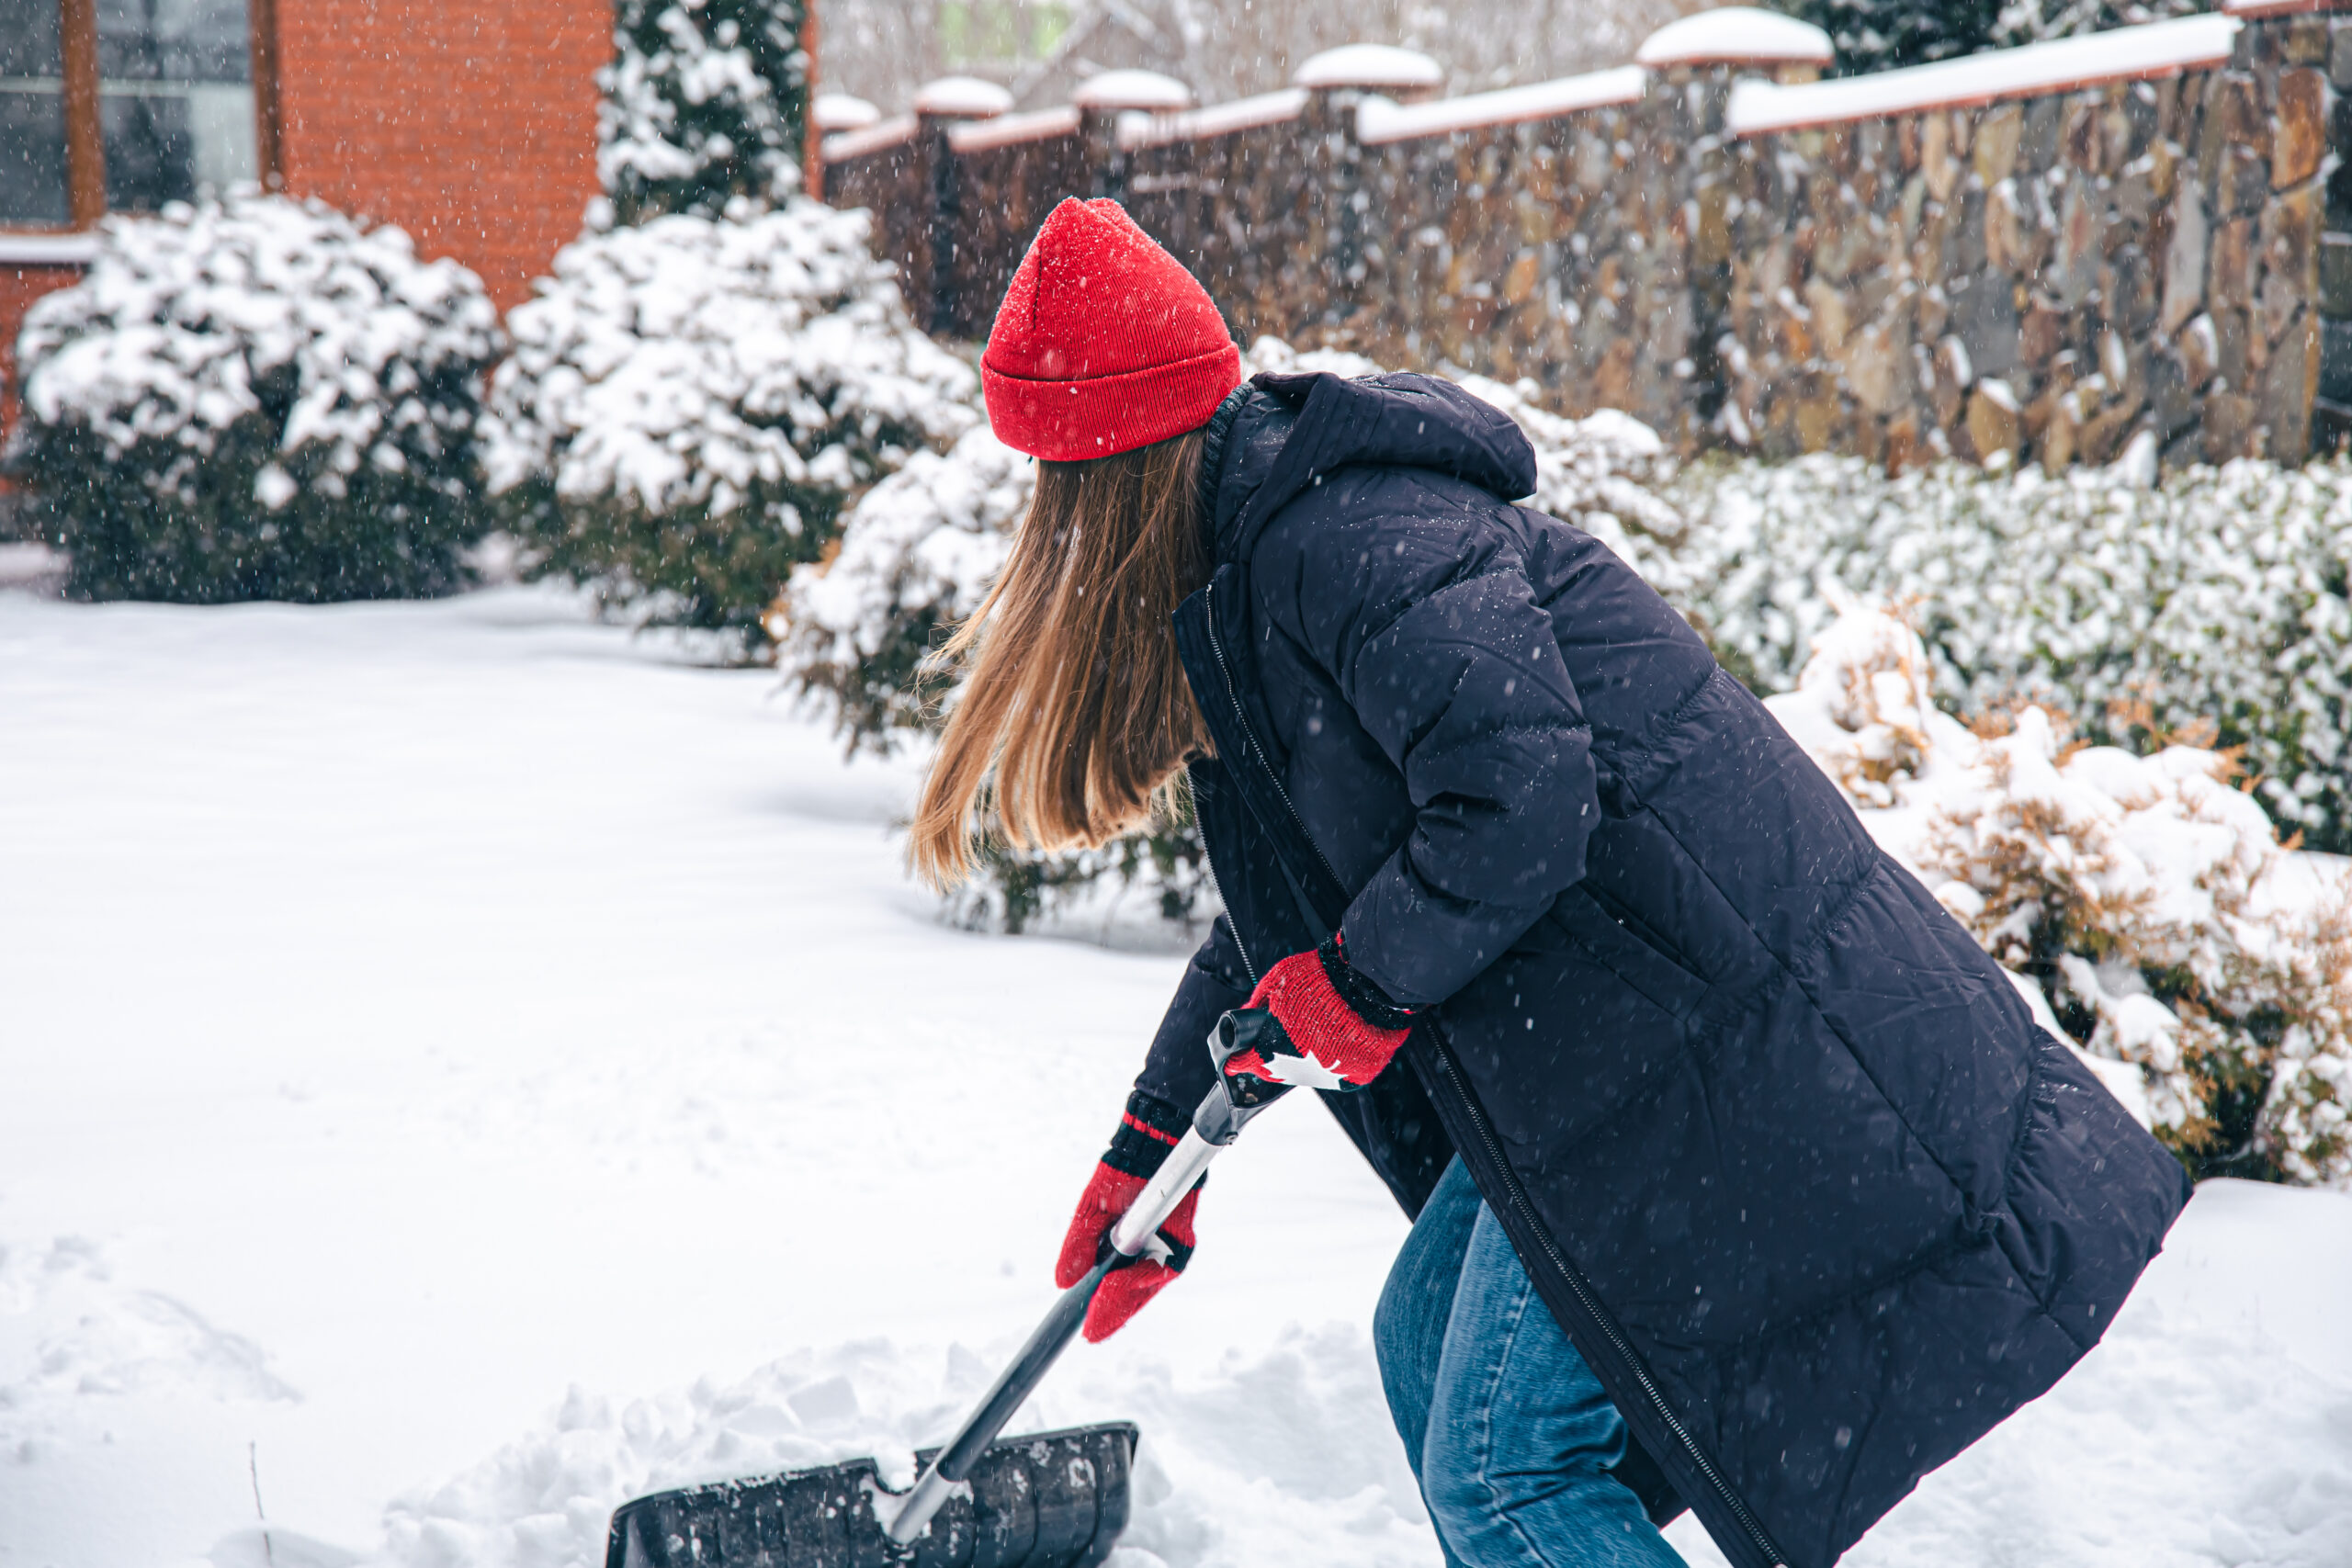 A young woman in a red hat, red mittens and a black jacket cleans snow in the yard in snowy weather, copy space.